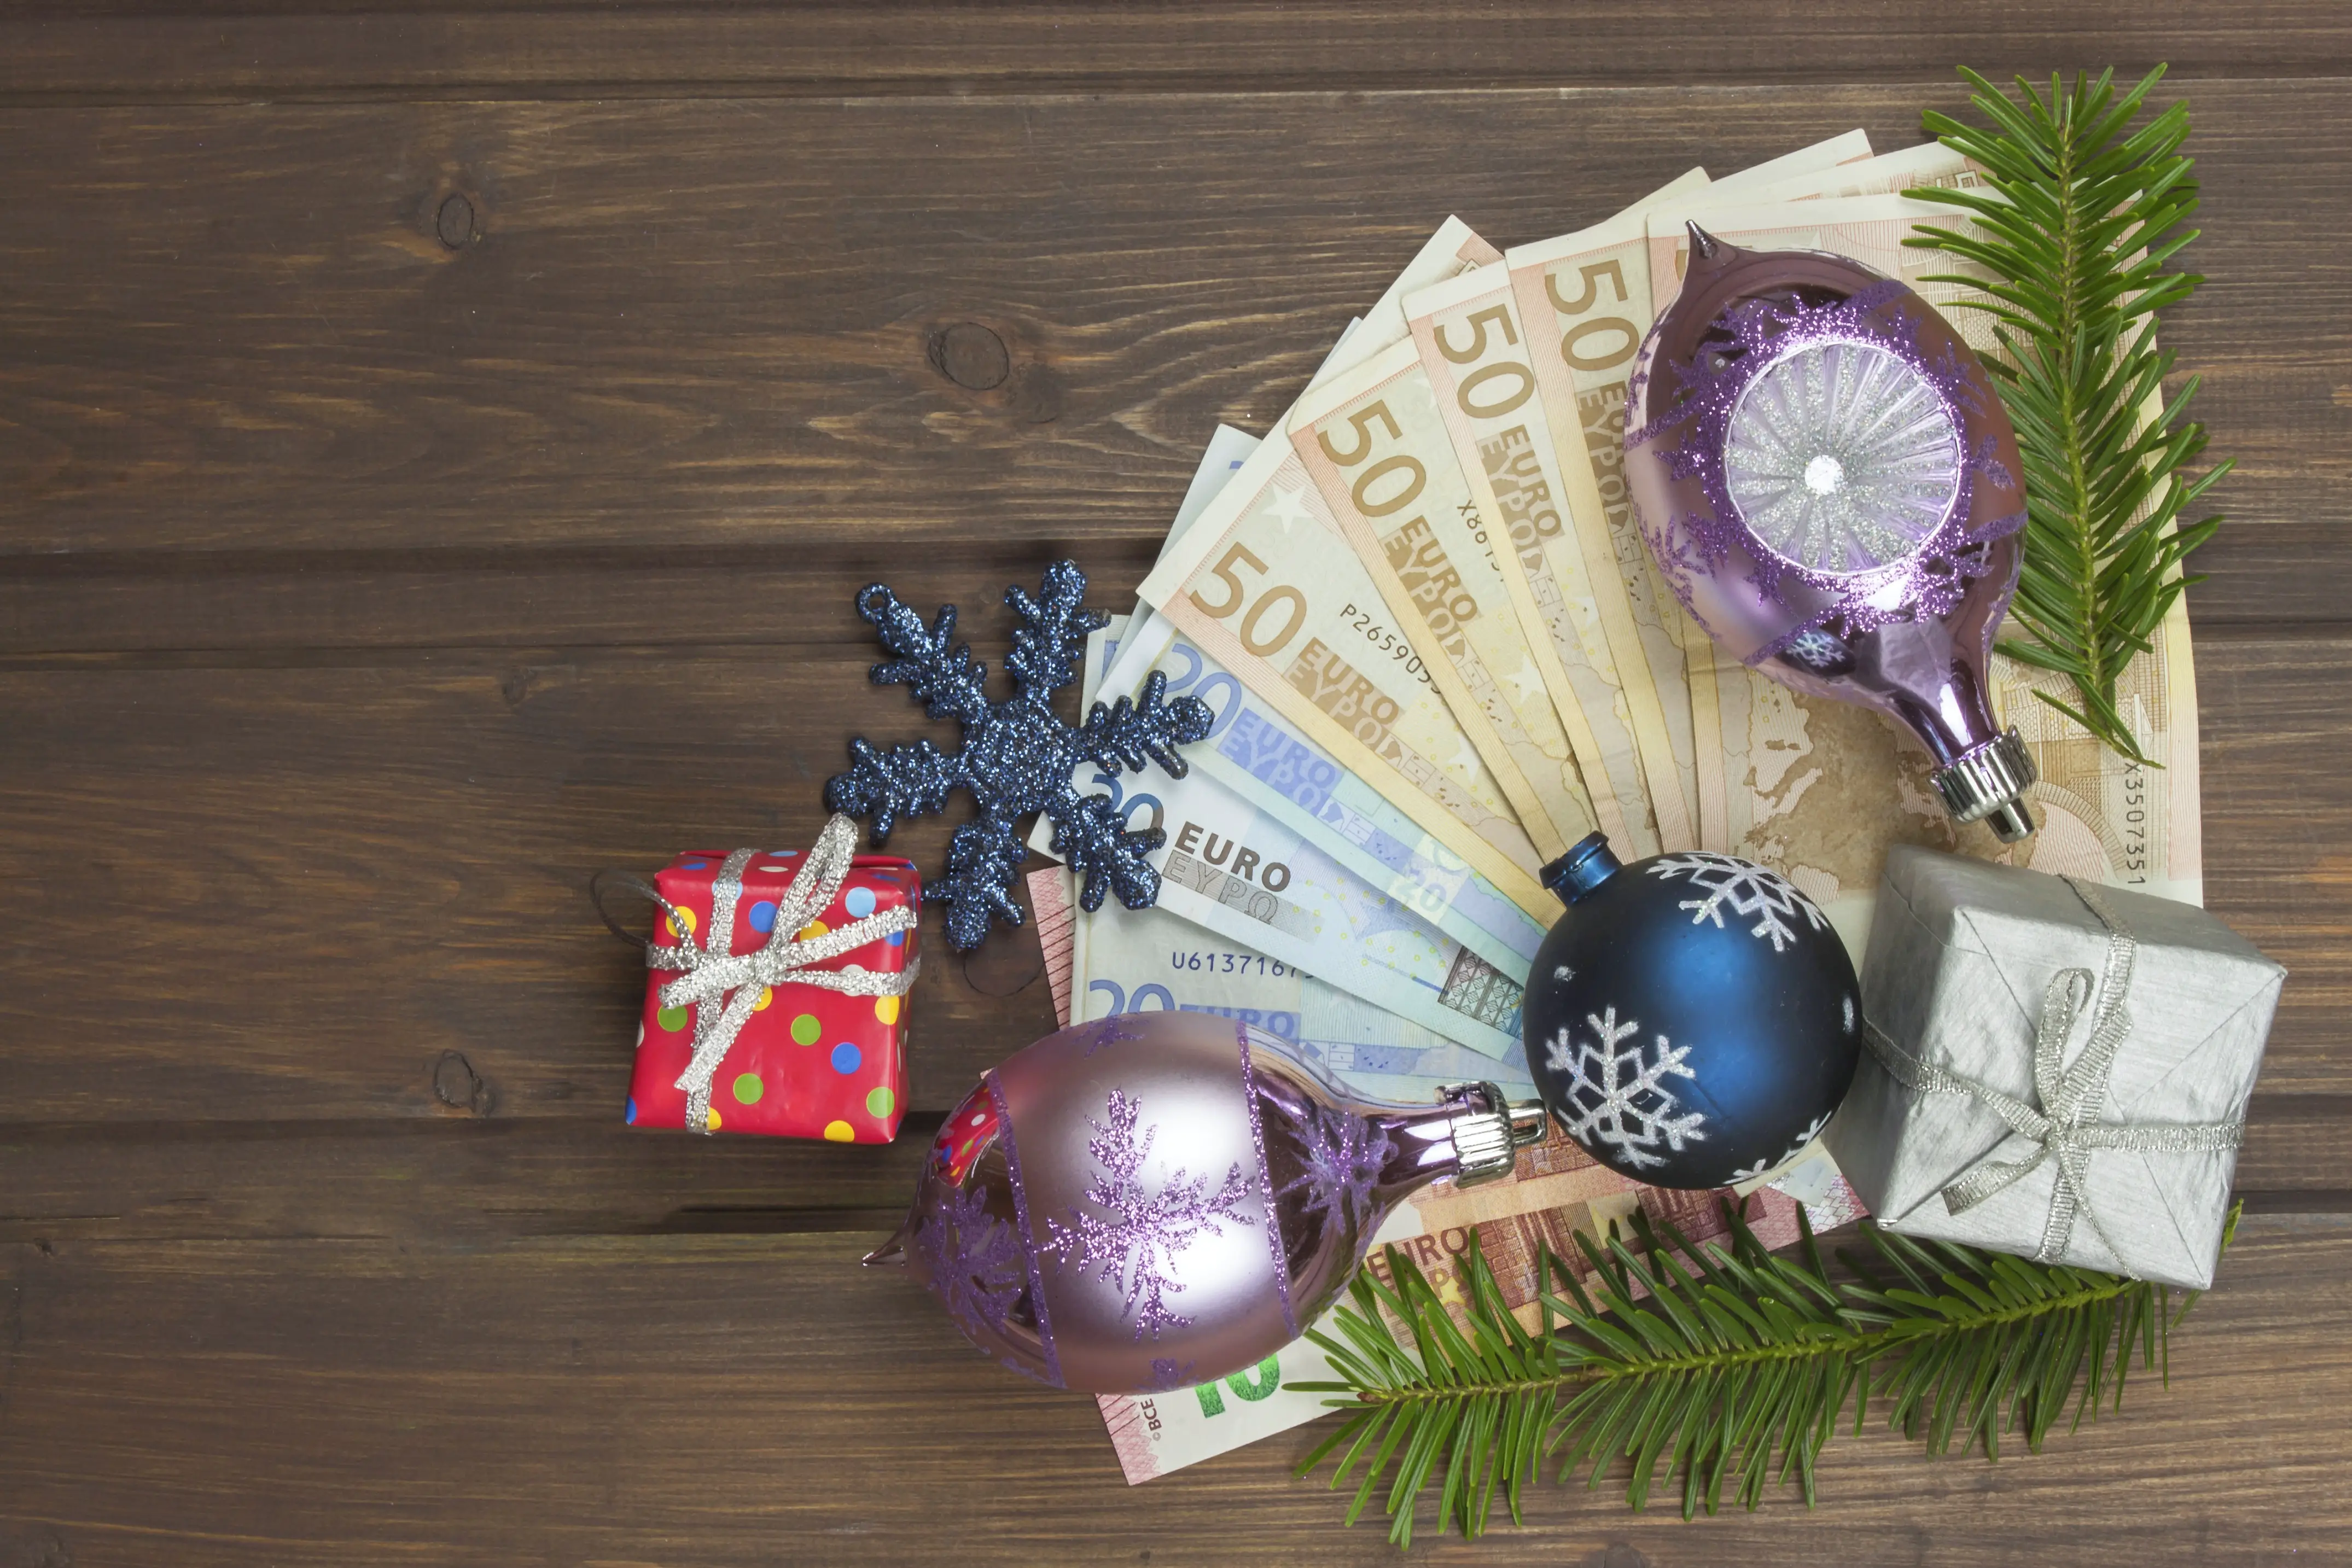 How to make extra money in time for the holidays